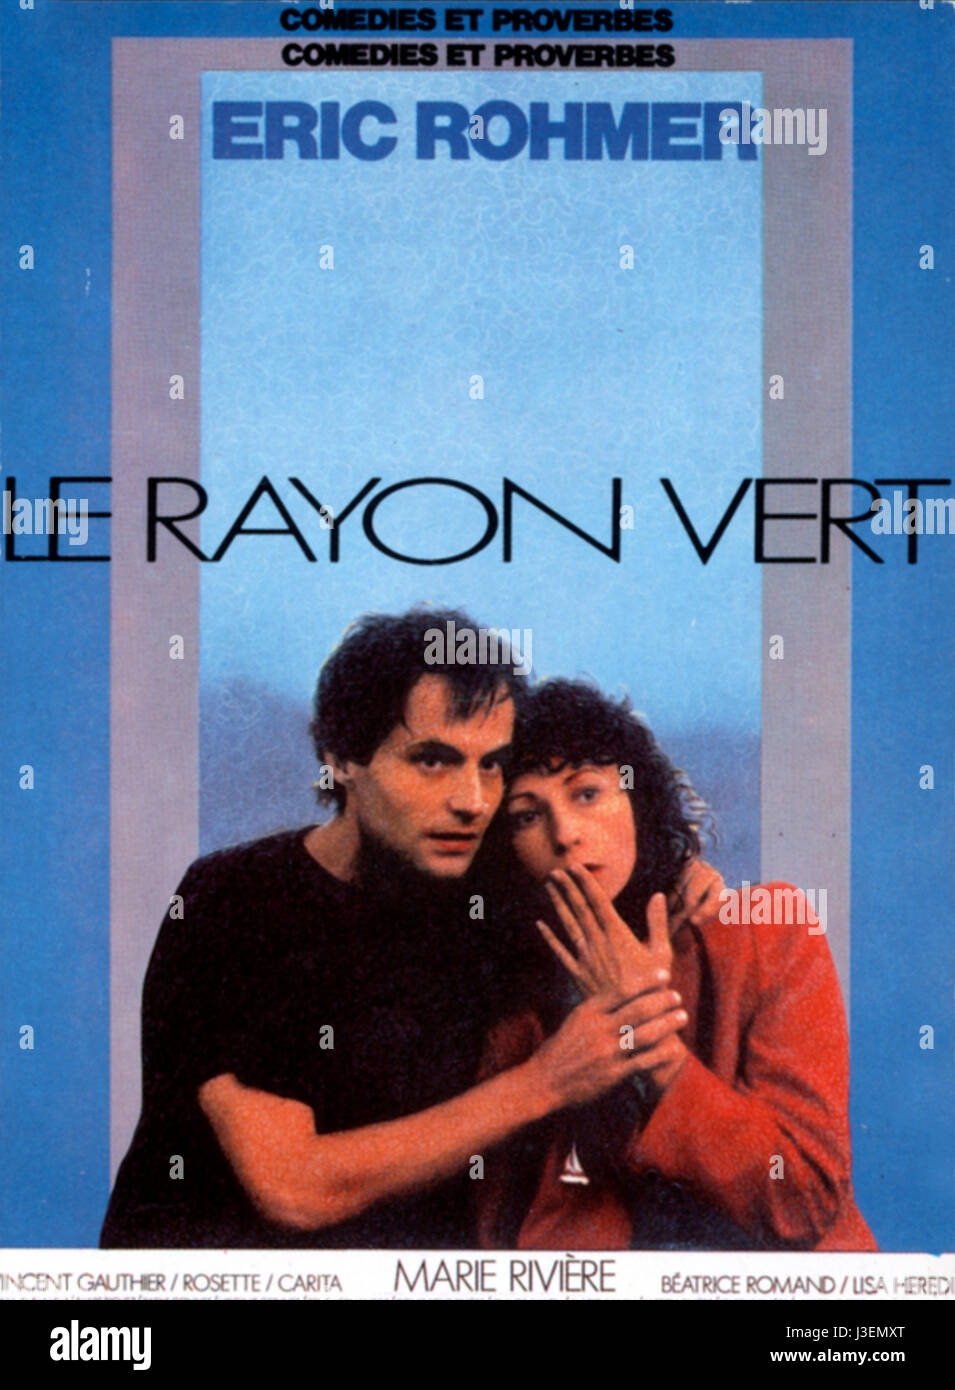 Le Rayon vert Summer Year : 1986  France Vincent Gauthier, Marie Rivière affiche, poster  Director: Eric Rohmer Stock Photo